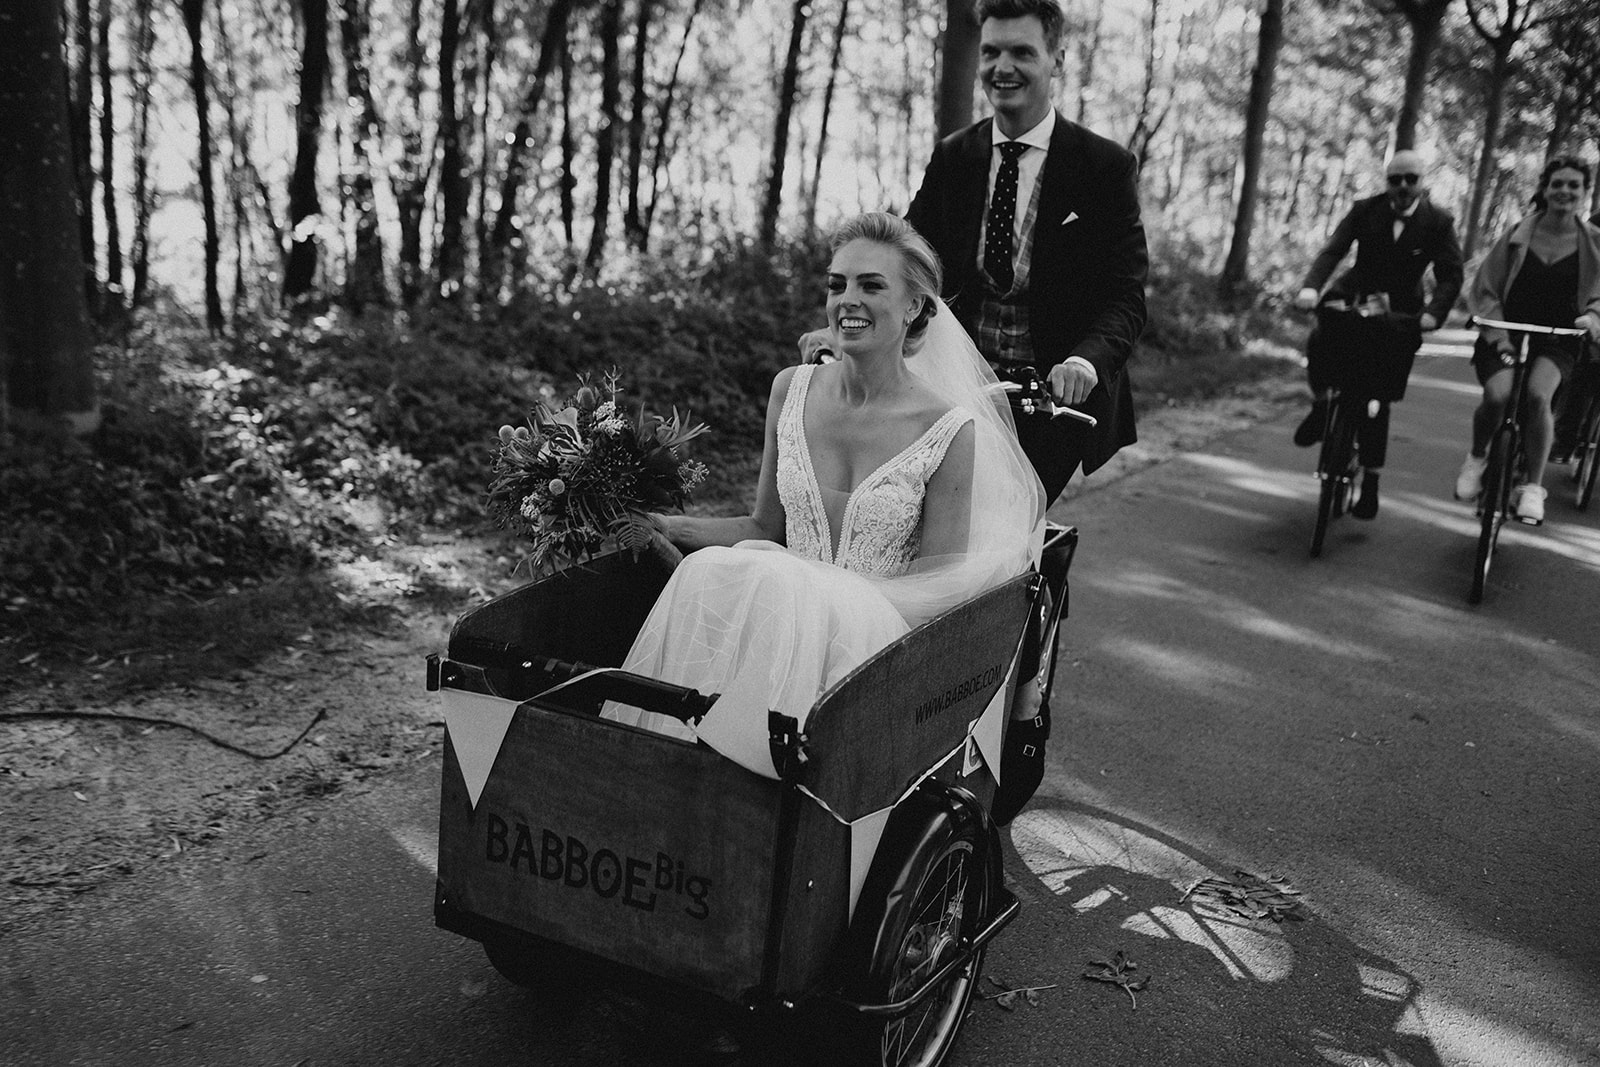 best wedding ride you can have, bike ride through the city of Amsterdam. Wedding couple on a bike.